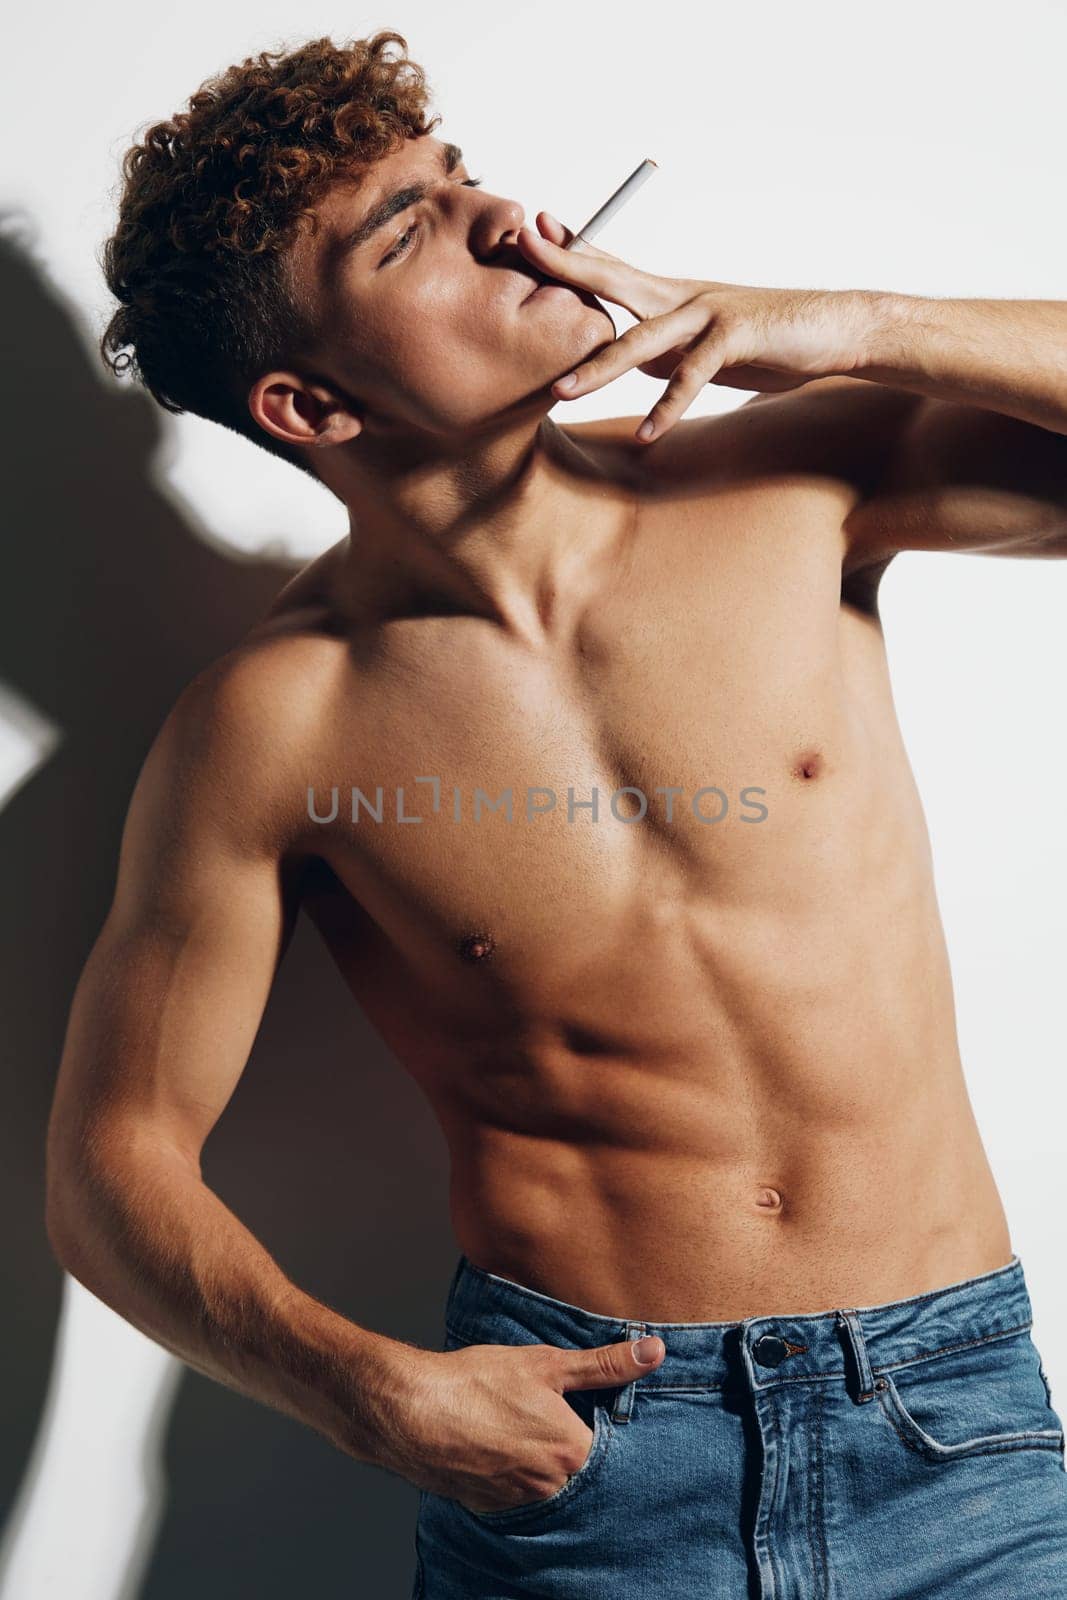 man athletic jeans smoke smokes gray background health guy body cigarette young muscle chest adult gray